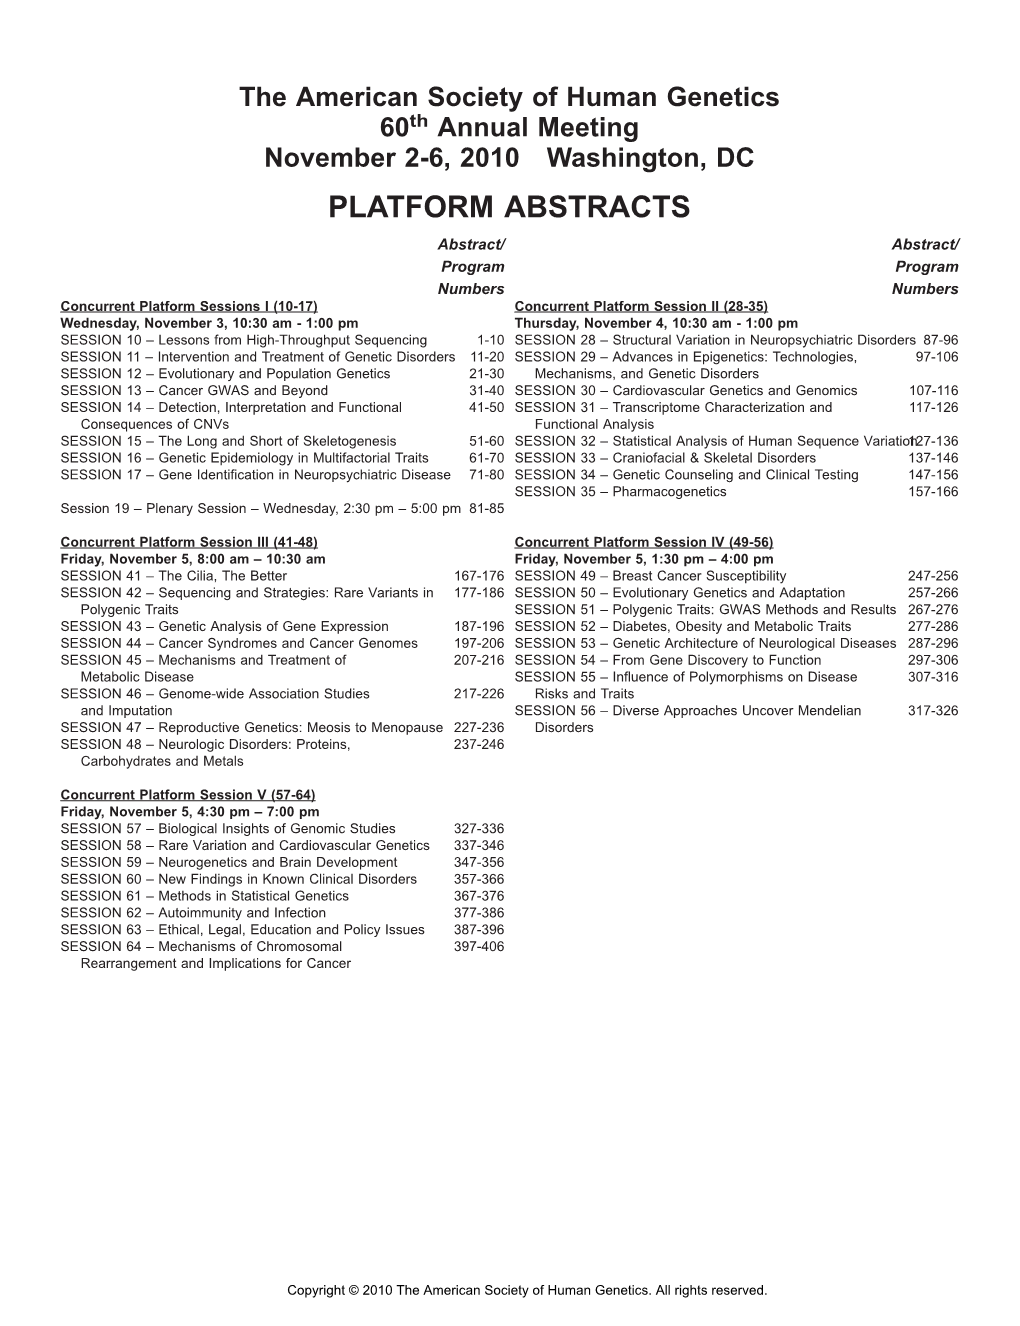 Platform Abstracts